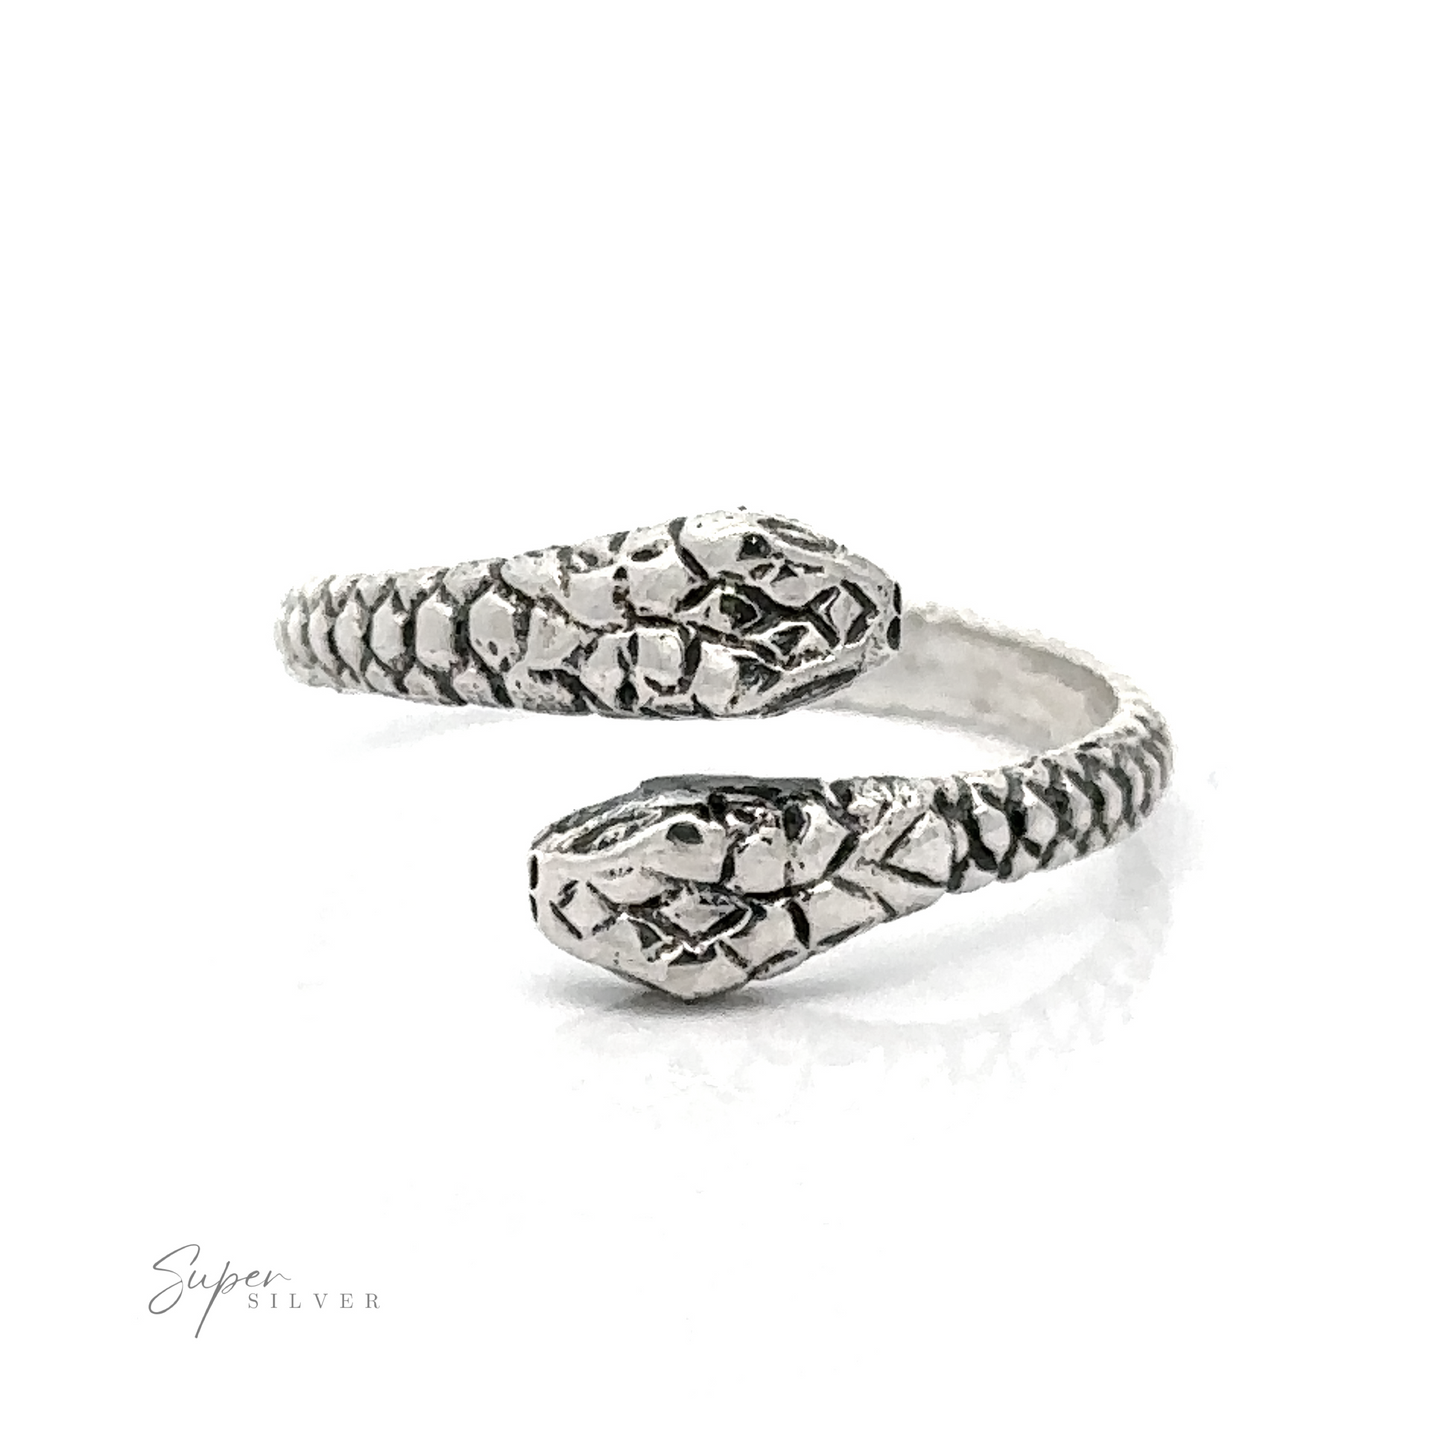 Sterling Silver Two Headed Snake Ring with a textured band and detailed snake heads at each end, displayed against a white background.